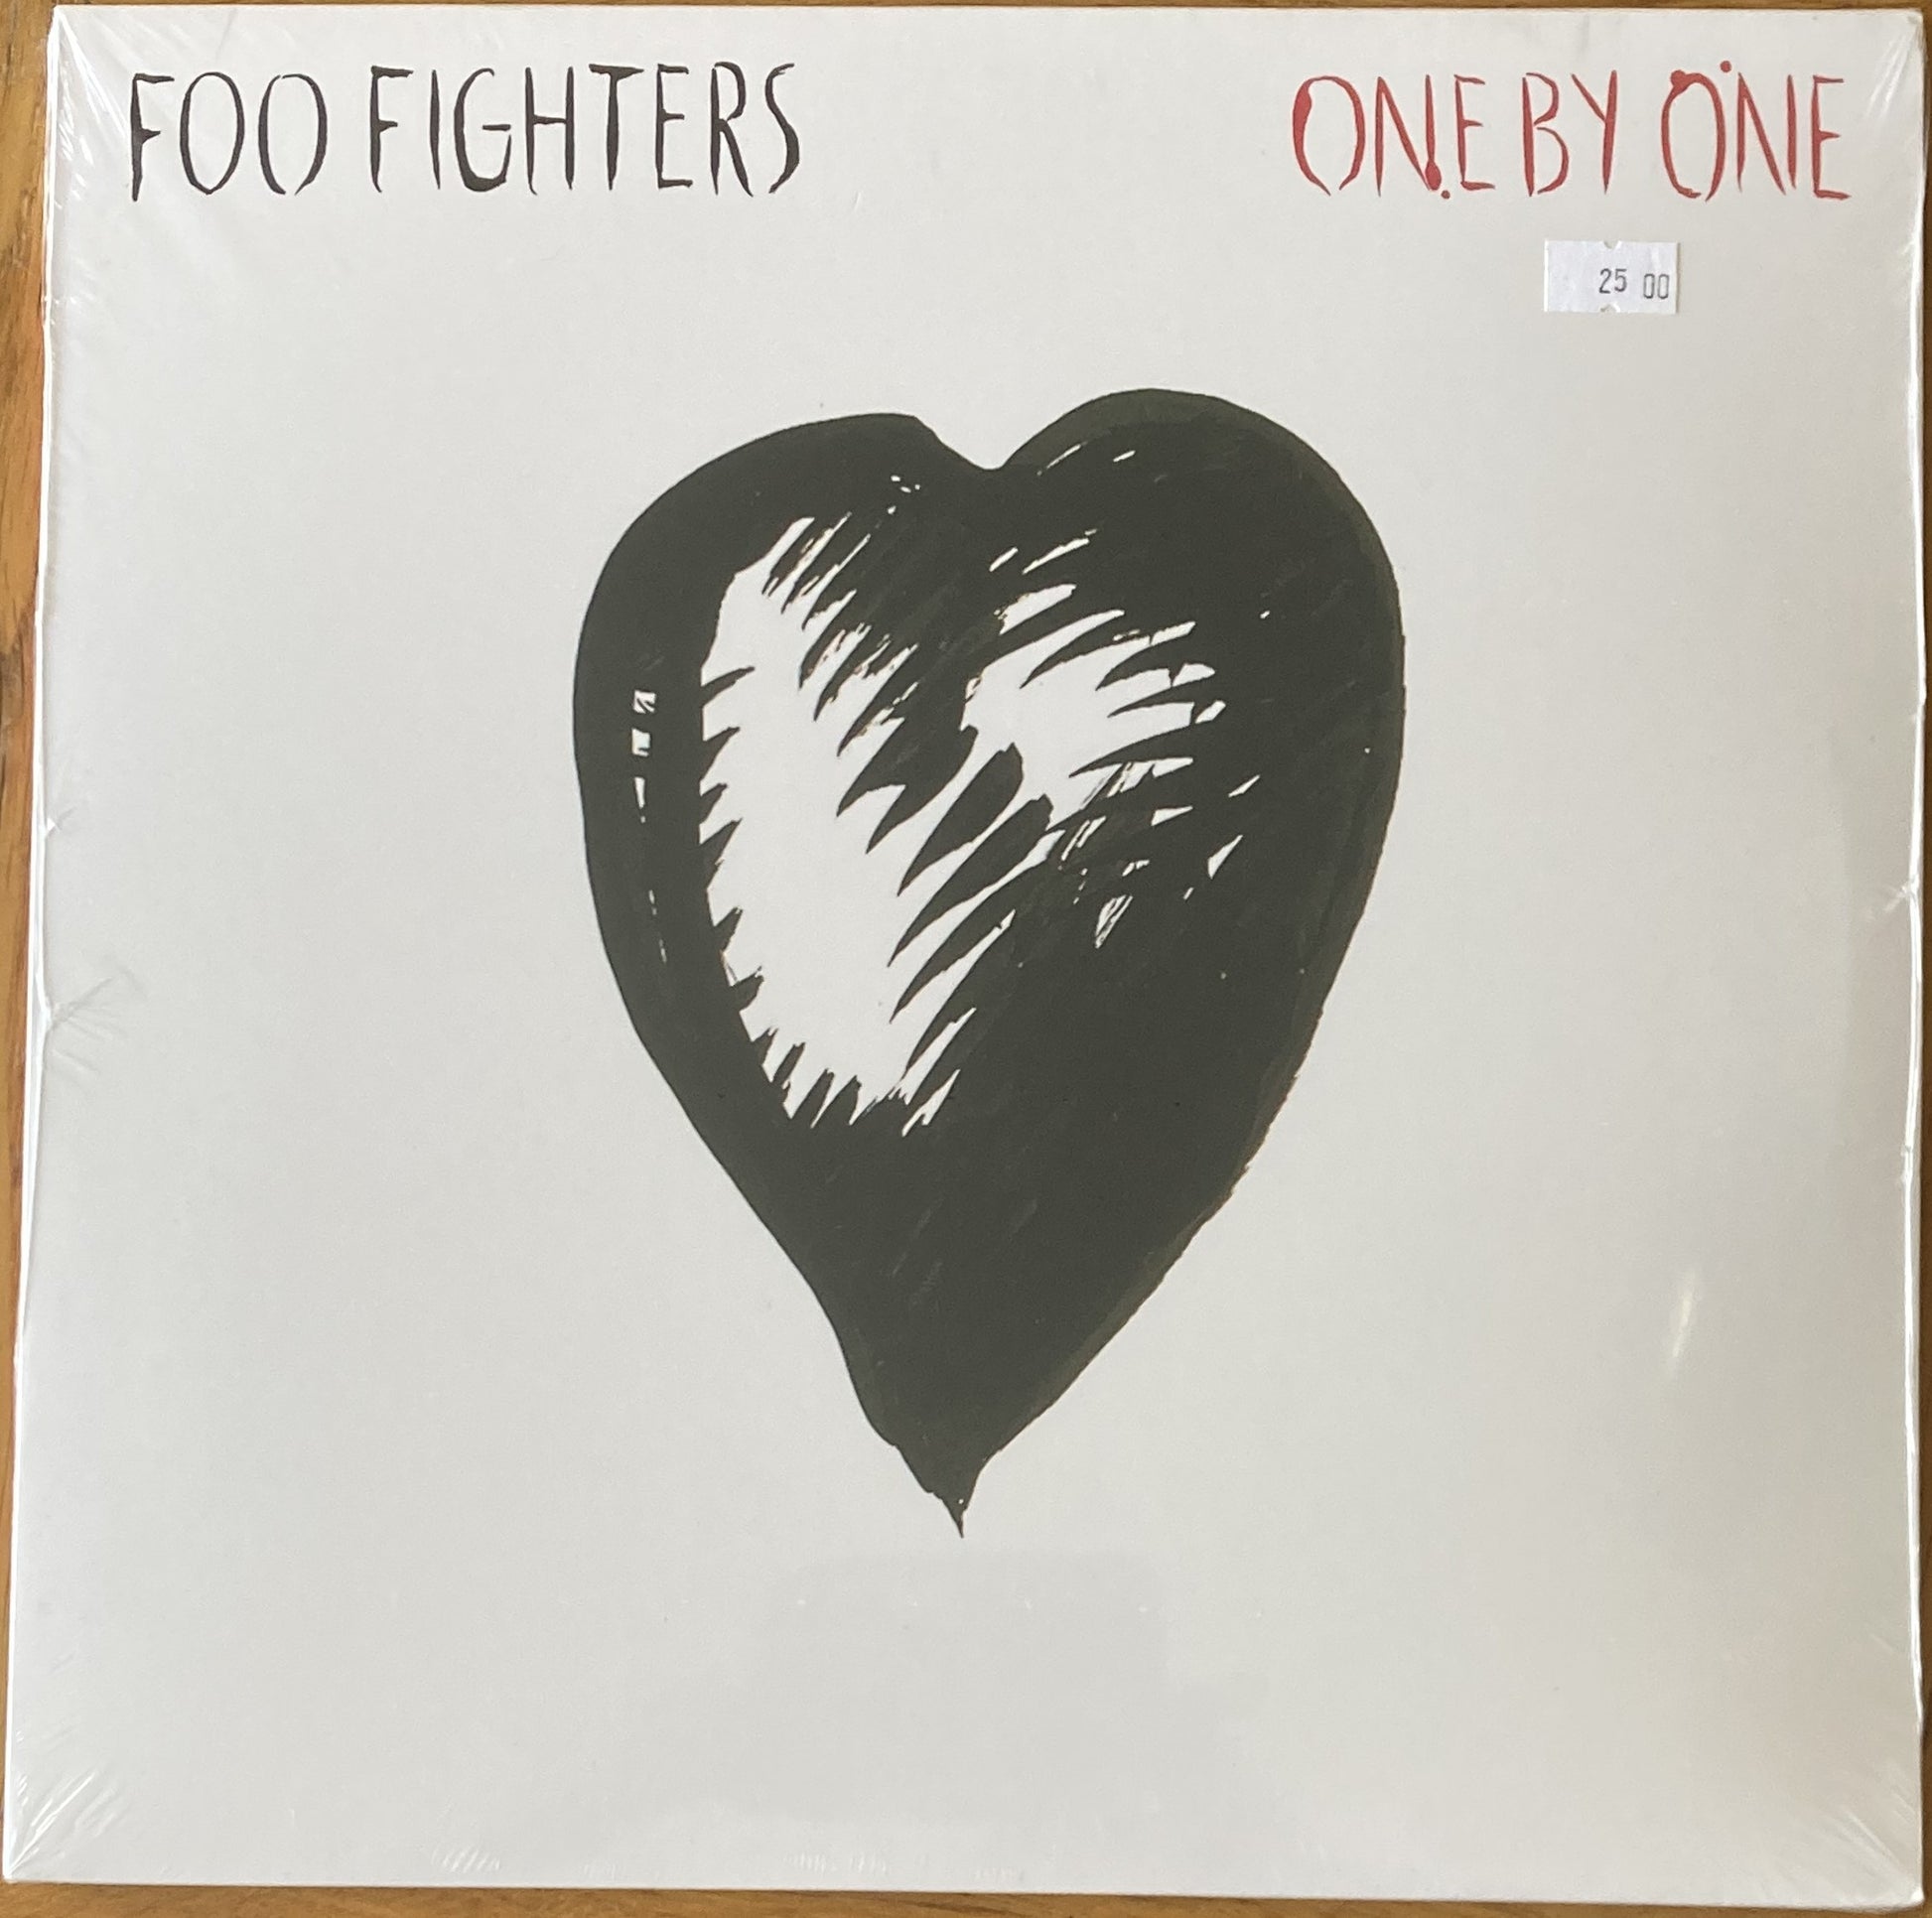 The front of 'Foo Fighters - One by One' on vinyl